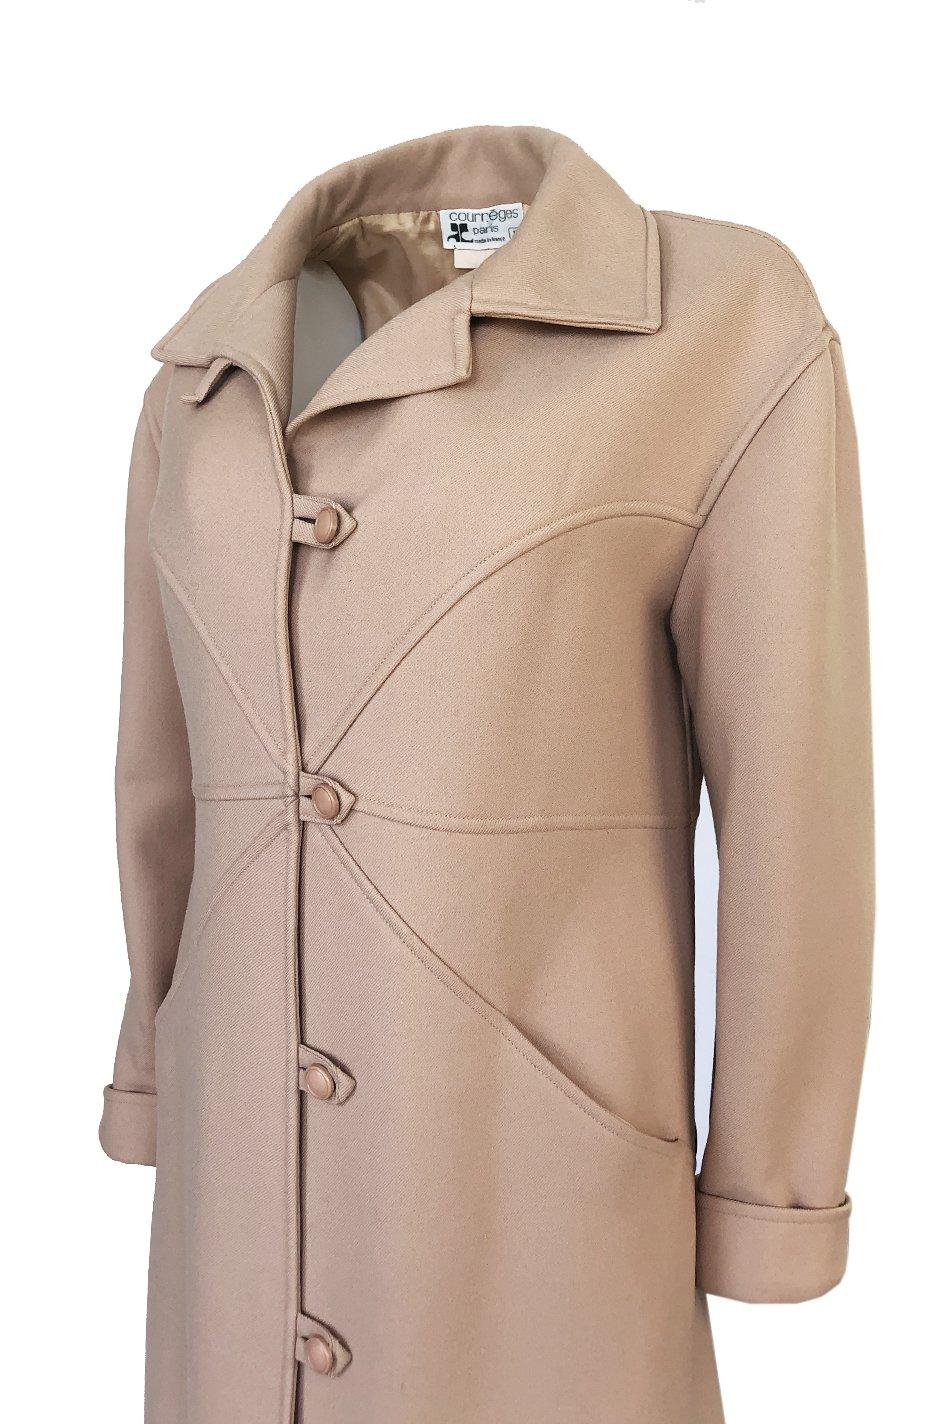 Immaculate 1960s Courreges Unusually Seamed Camel Toggle Coat 4